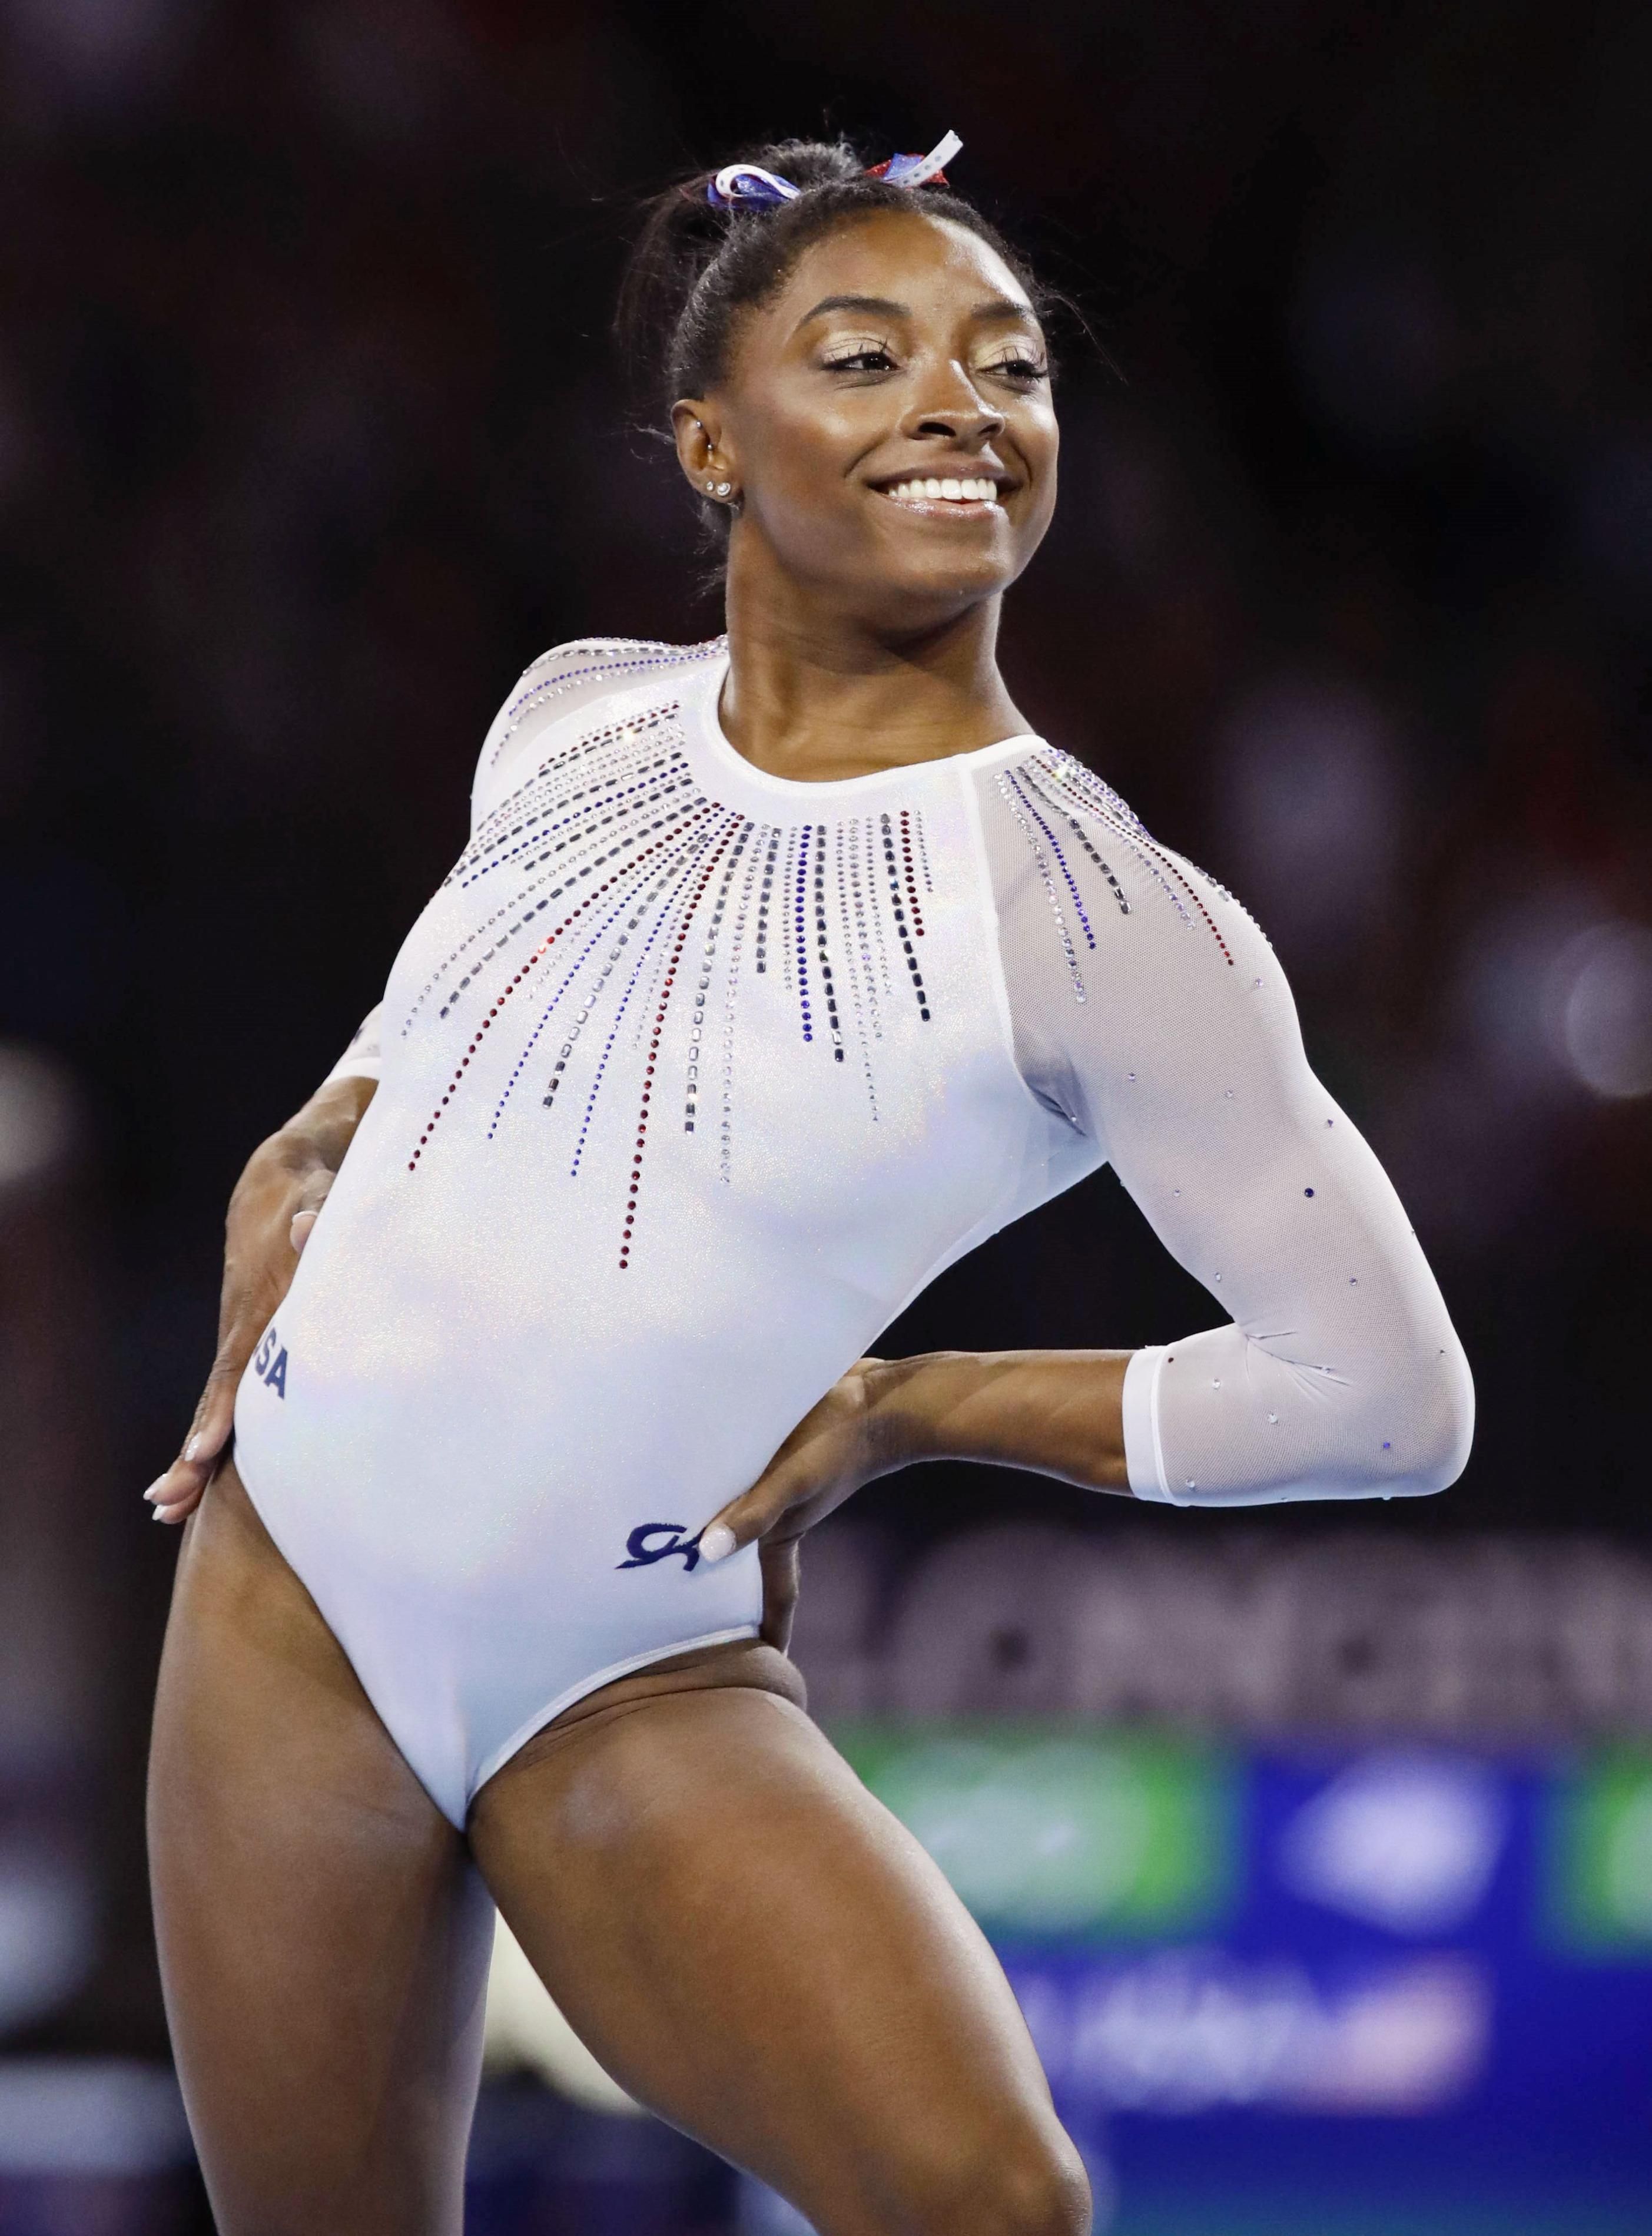 Simone Biles performing her floor routine during the women's individual all-around final at the World Gymnastics Championships in Stuttgart, Germany. | Source: Getty Images